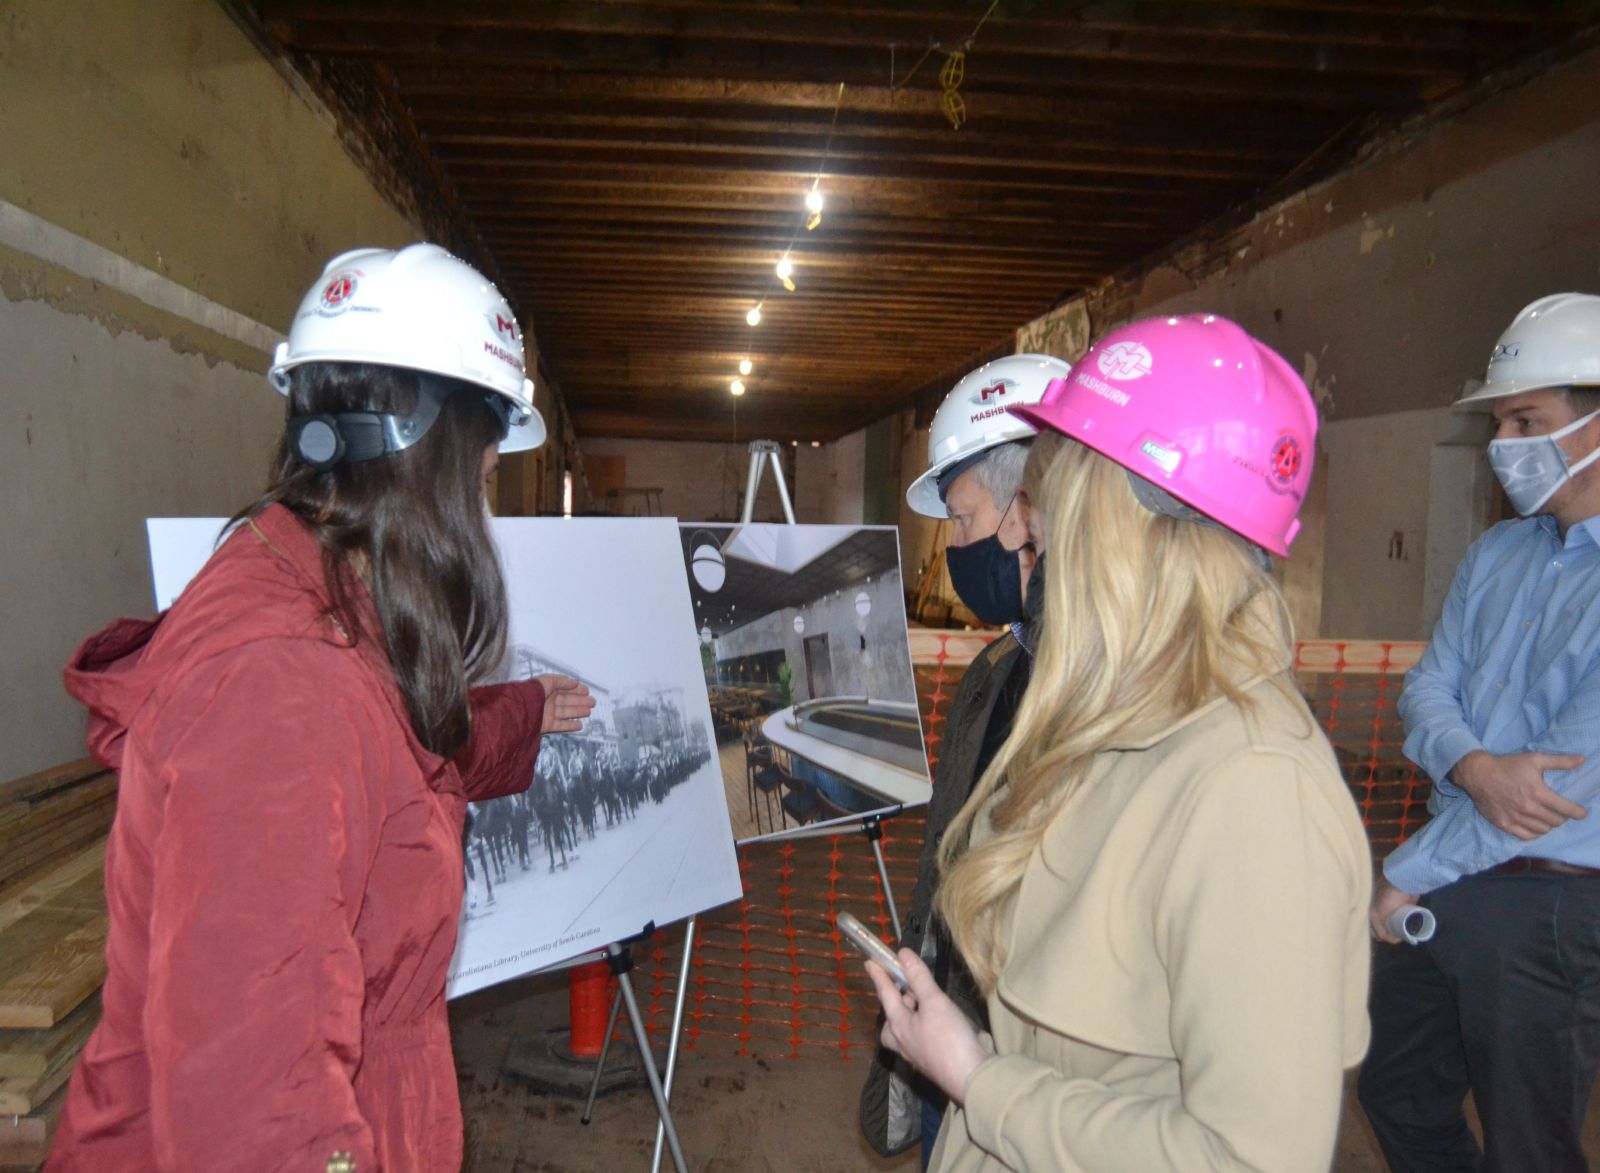 Janie Campbell (far left) points out details in historic photographs to a group including Columbia-area developer Scott Middleton (center, in black mask). Campbell researches details to make sure historic preservation projects accurately reflect time periods and qualify for applicable local, state and federal tax credits. (Photo/Melinda Waldrop)